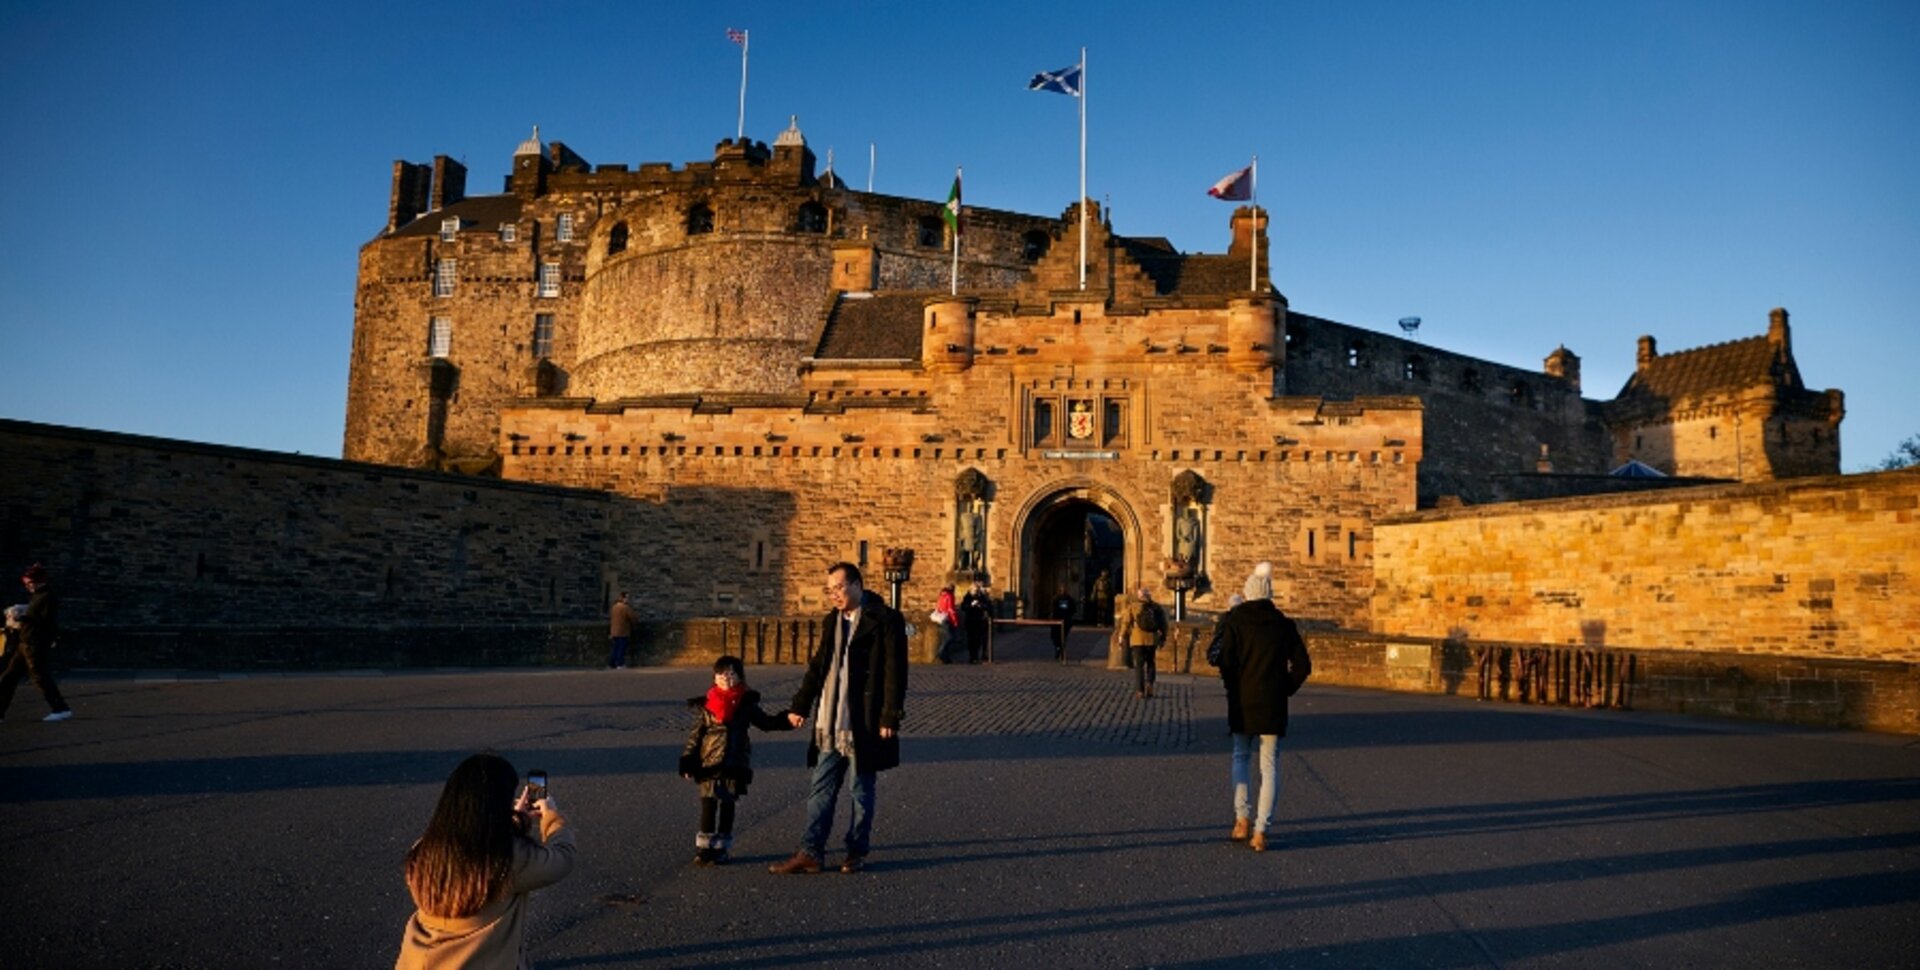 Edinburgh Castle - Scotland's busiest paid-for attraction in 2019 - saw visitor numbers drop by 87.2%